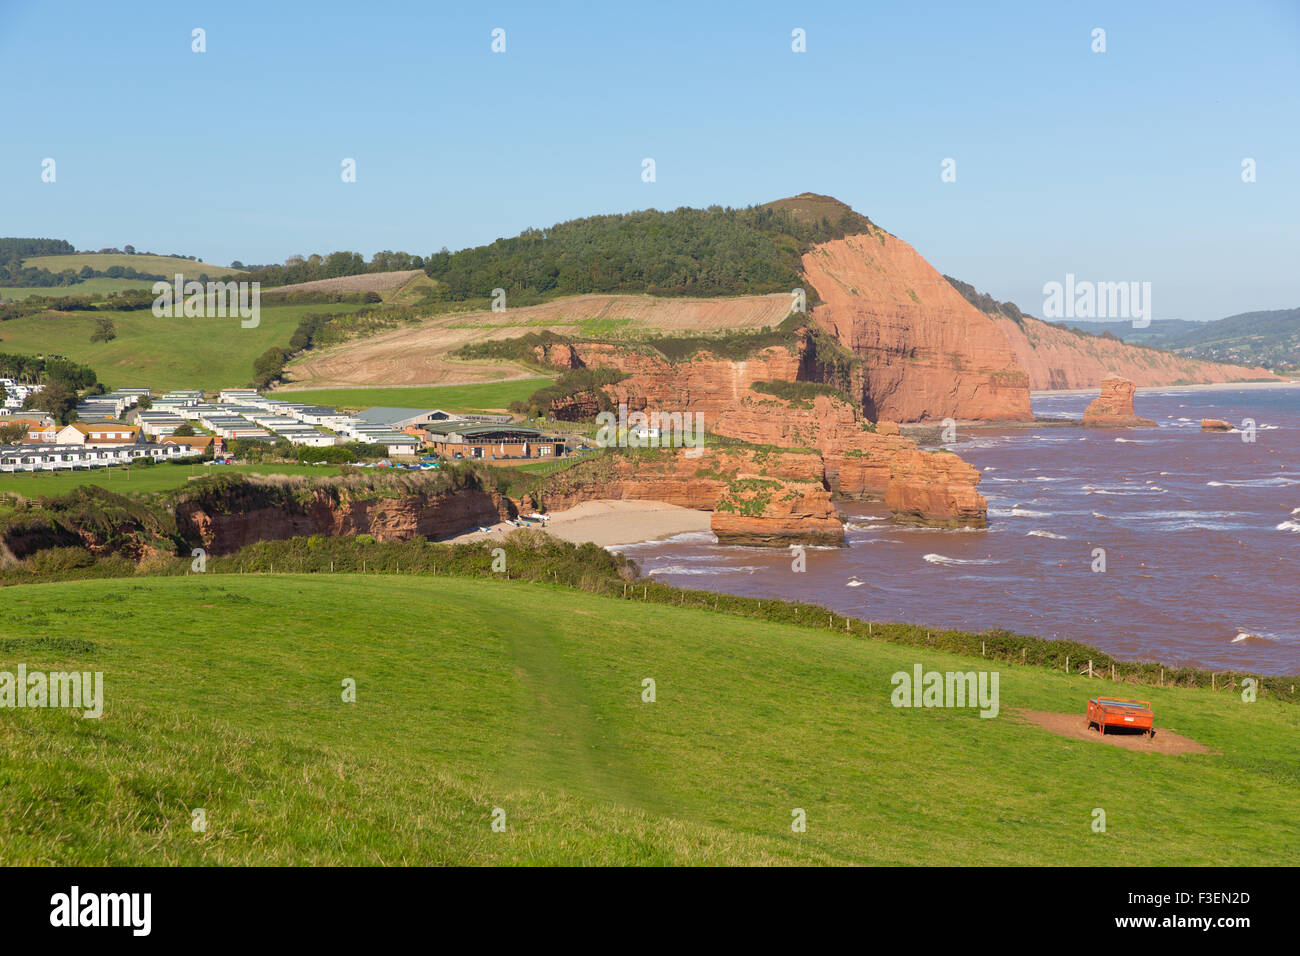 Ladram Bay Devon England UK located between Budleigh Salterton and Sidmouth and on the Jurassic Coast Stock Photo